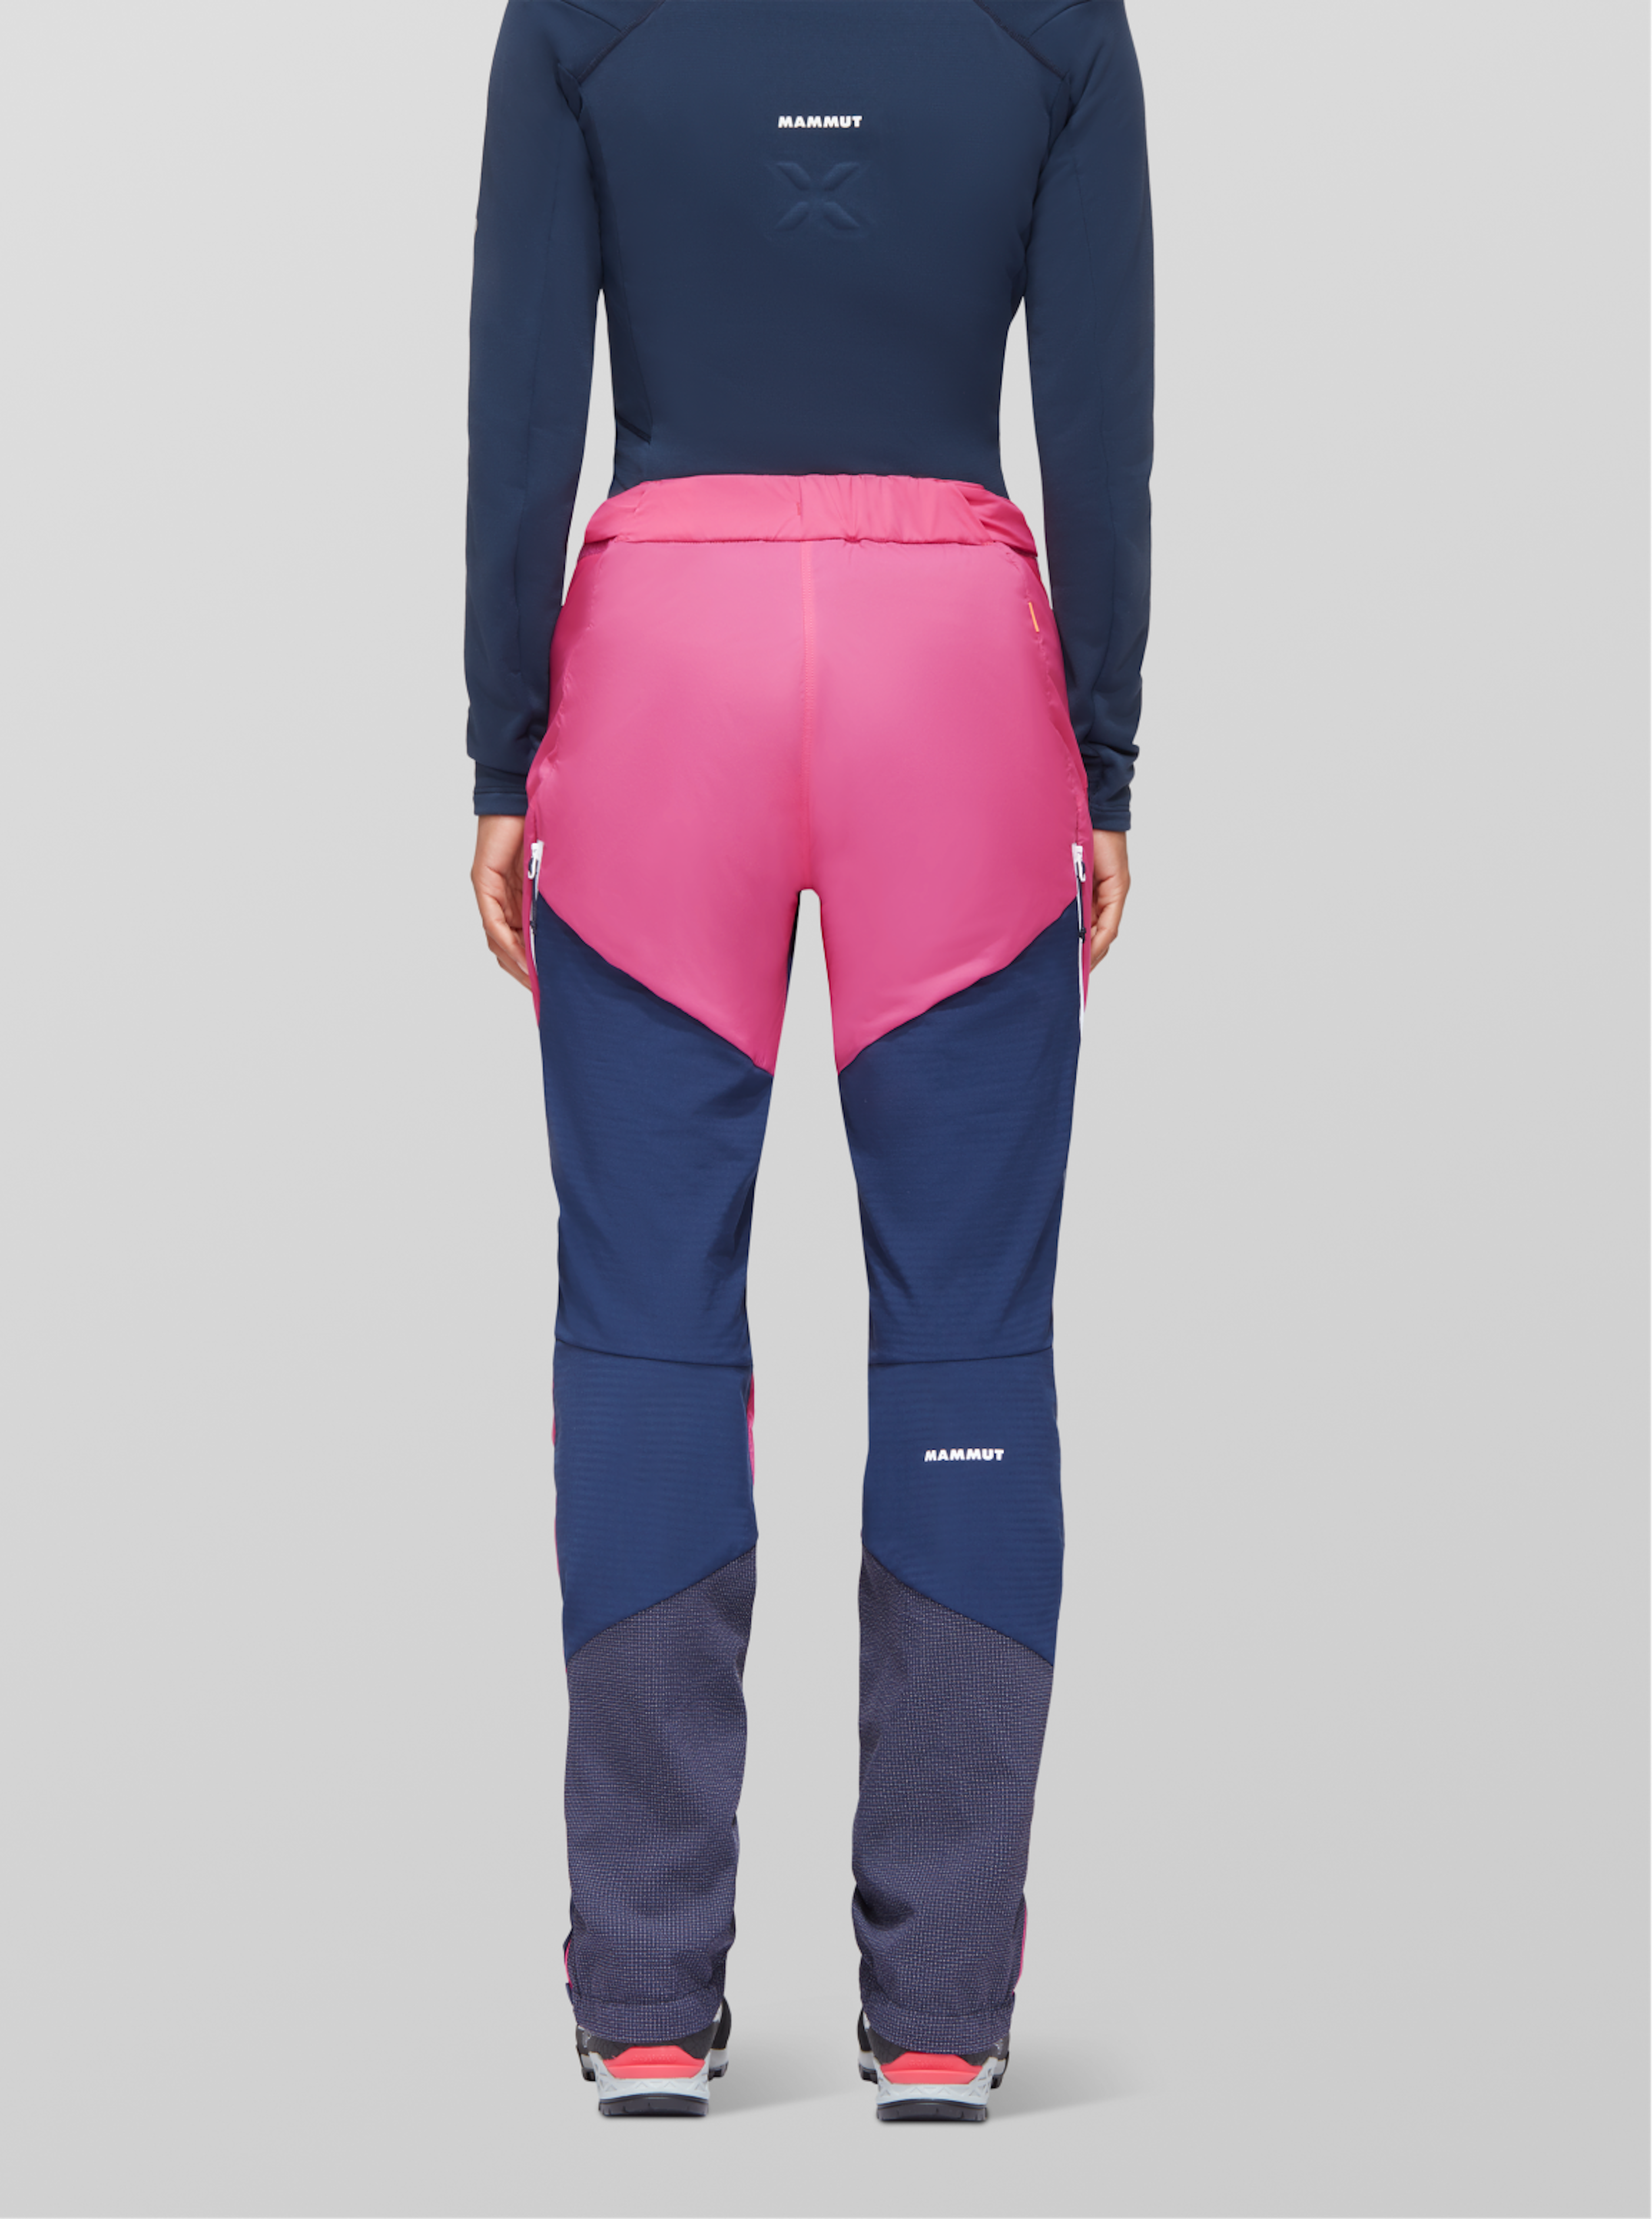 Mammut pants for women in blue / pink